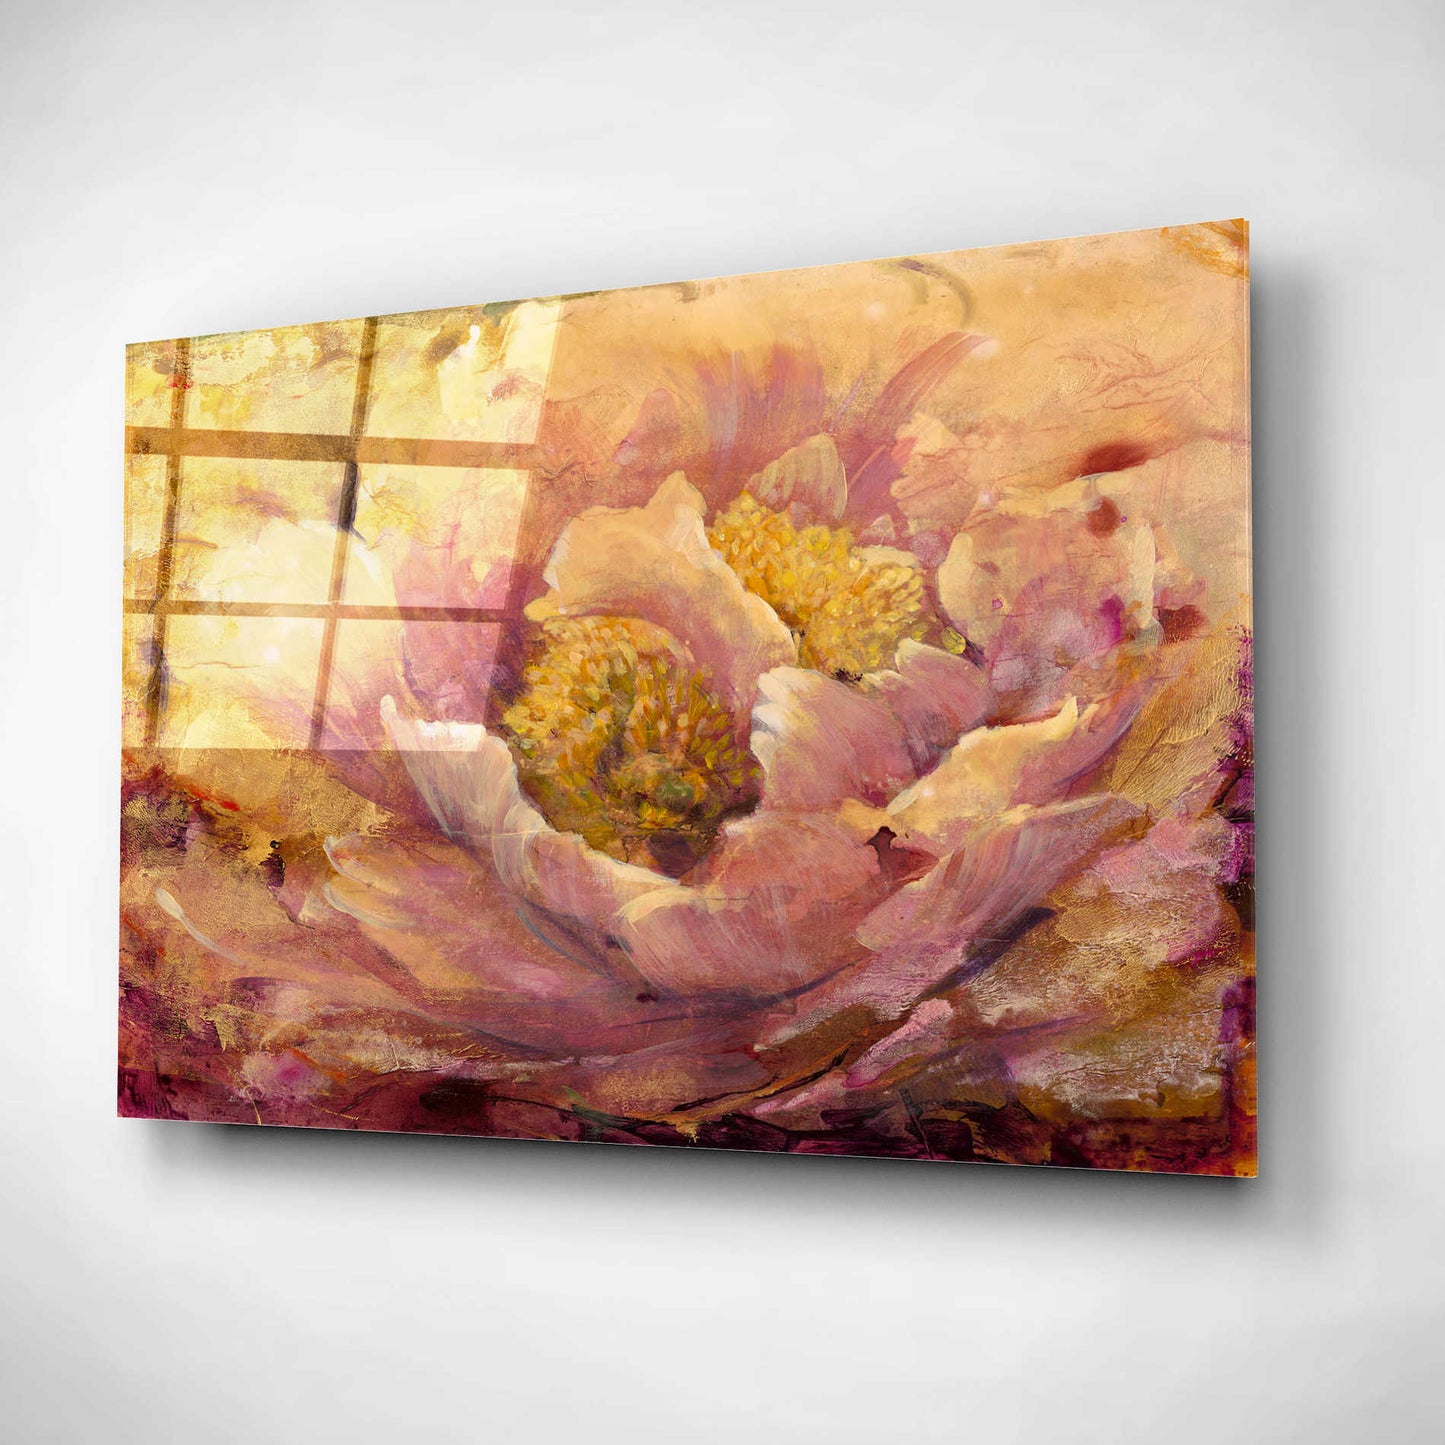 Epic Art 'Floral in Bloom I' by Tim O'Toole, Acrylic Glass Wall Art,24x16